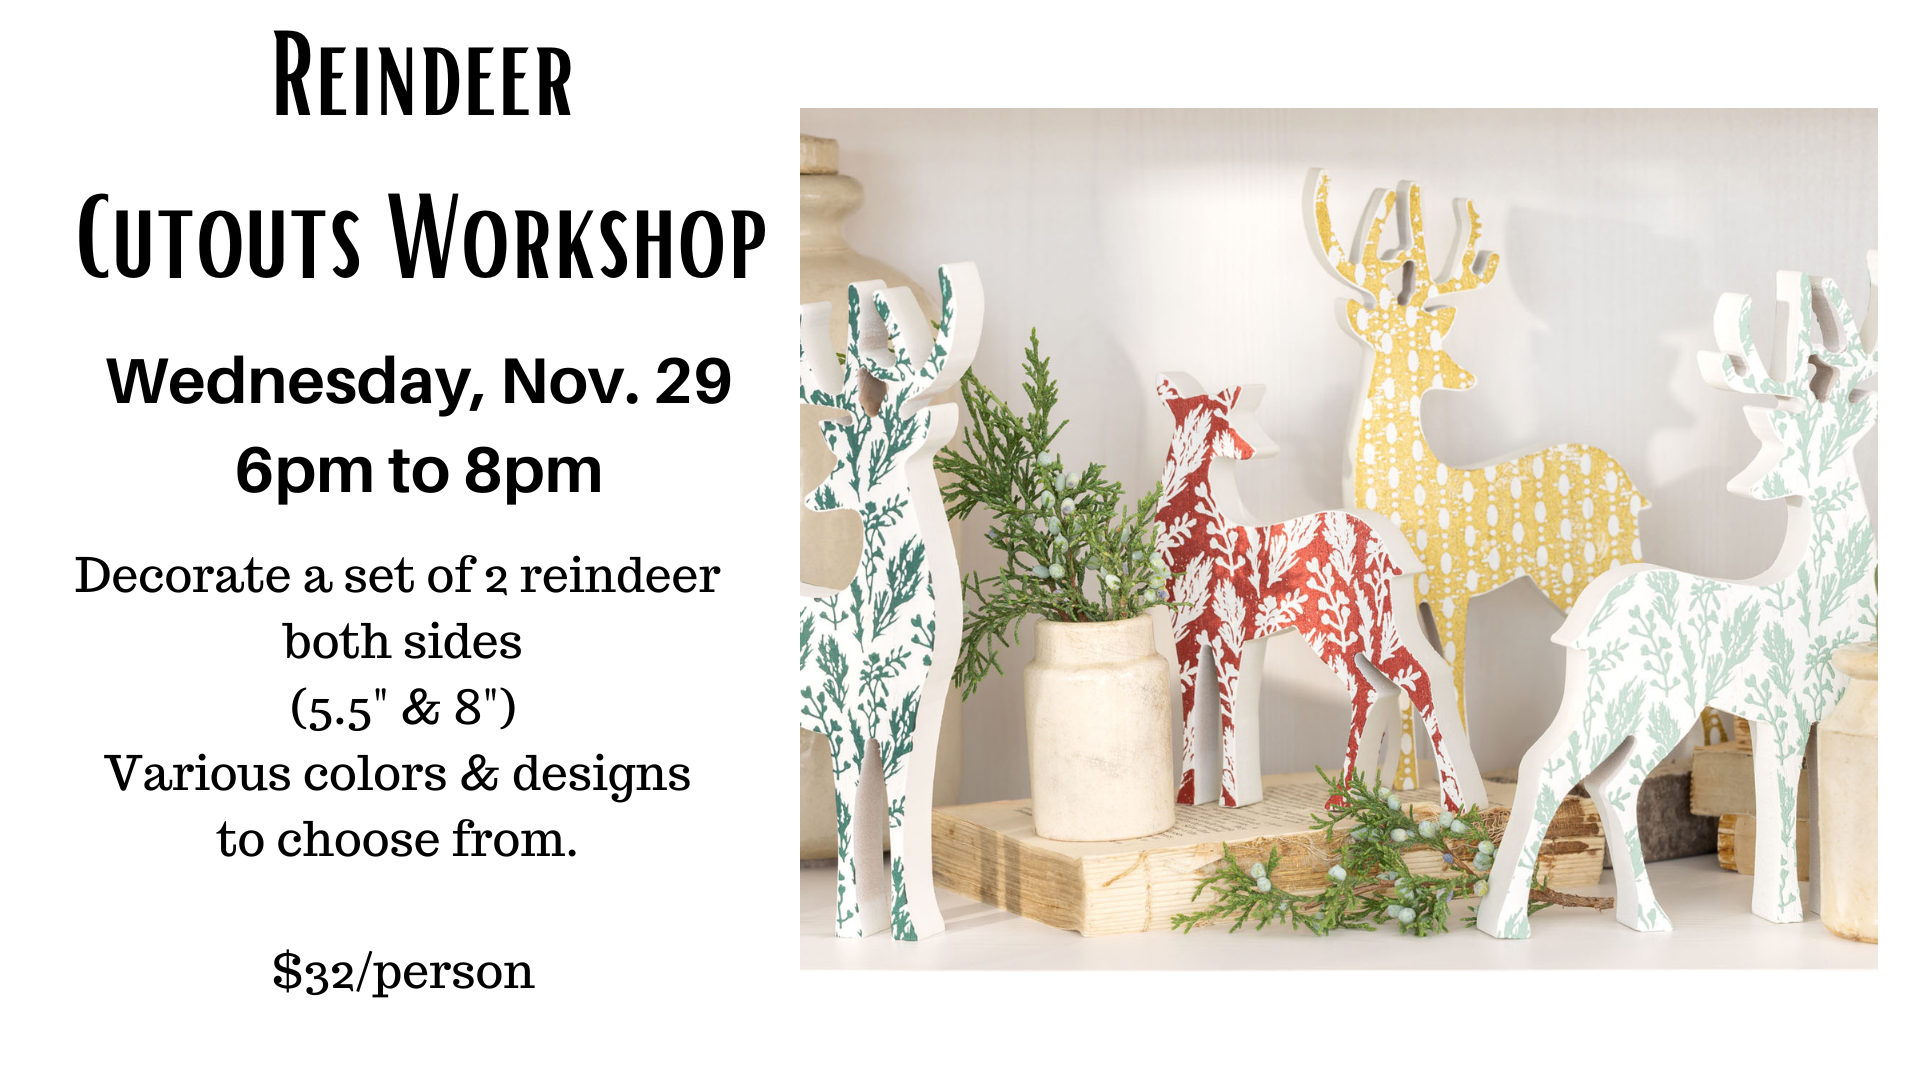 In Store Workshop - Reindeer Cutouts  Wednesday, November 29- 6pm to 8pm